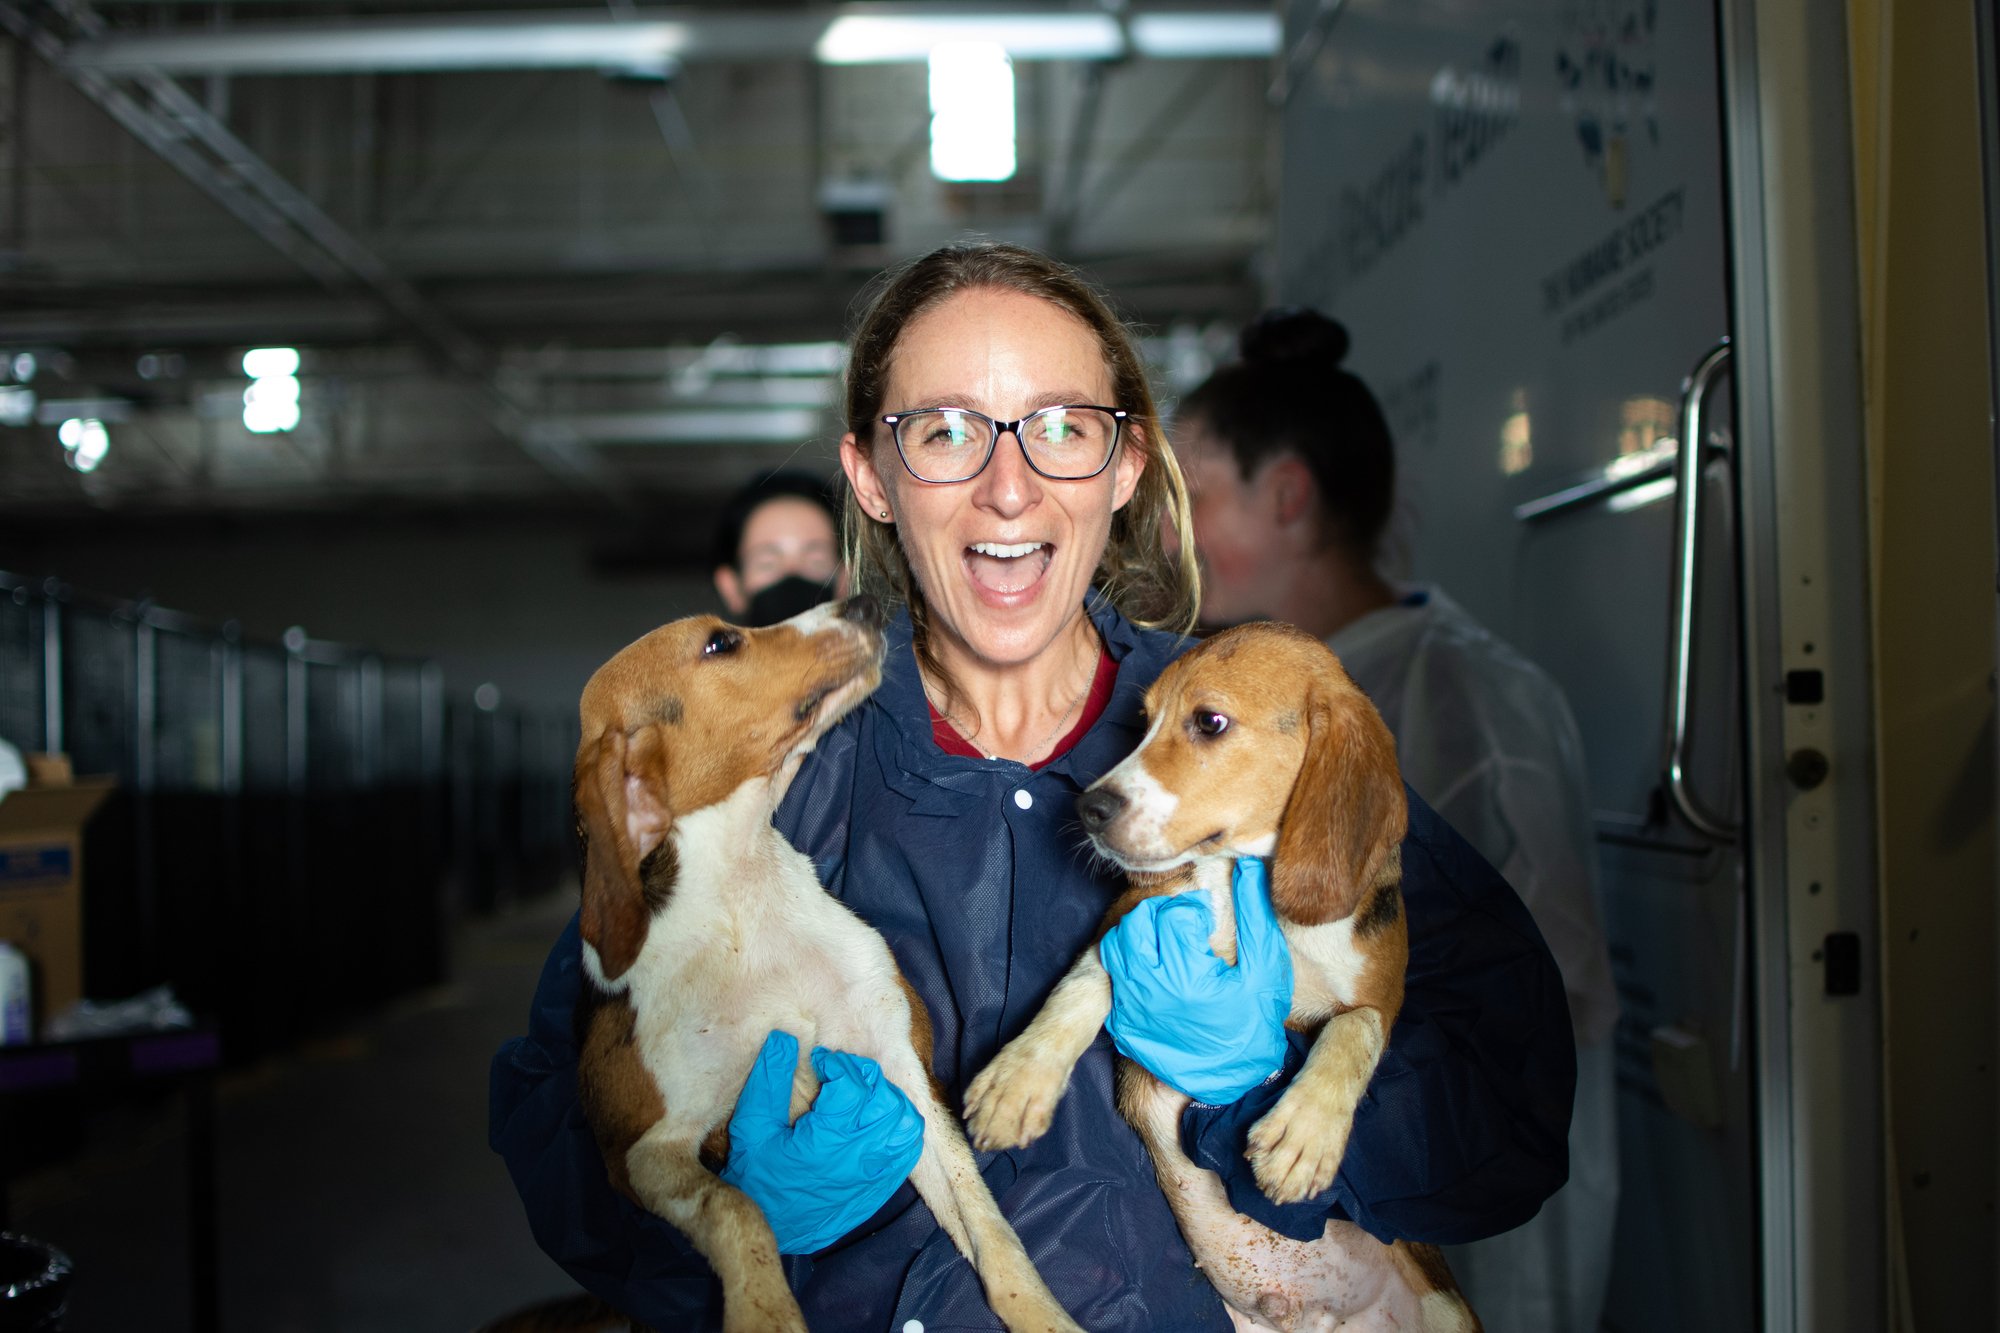 Devon smiles at the camera while holding two beagle puppies